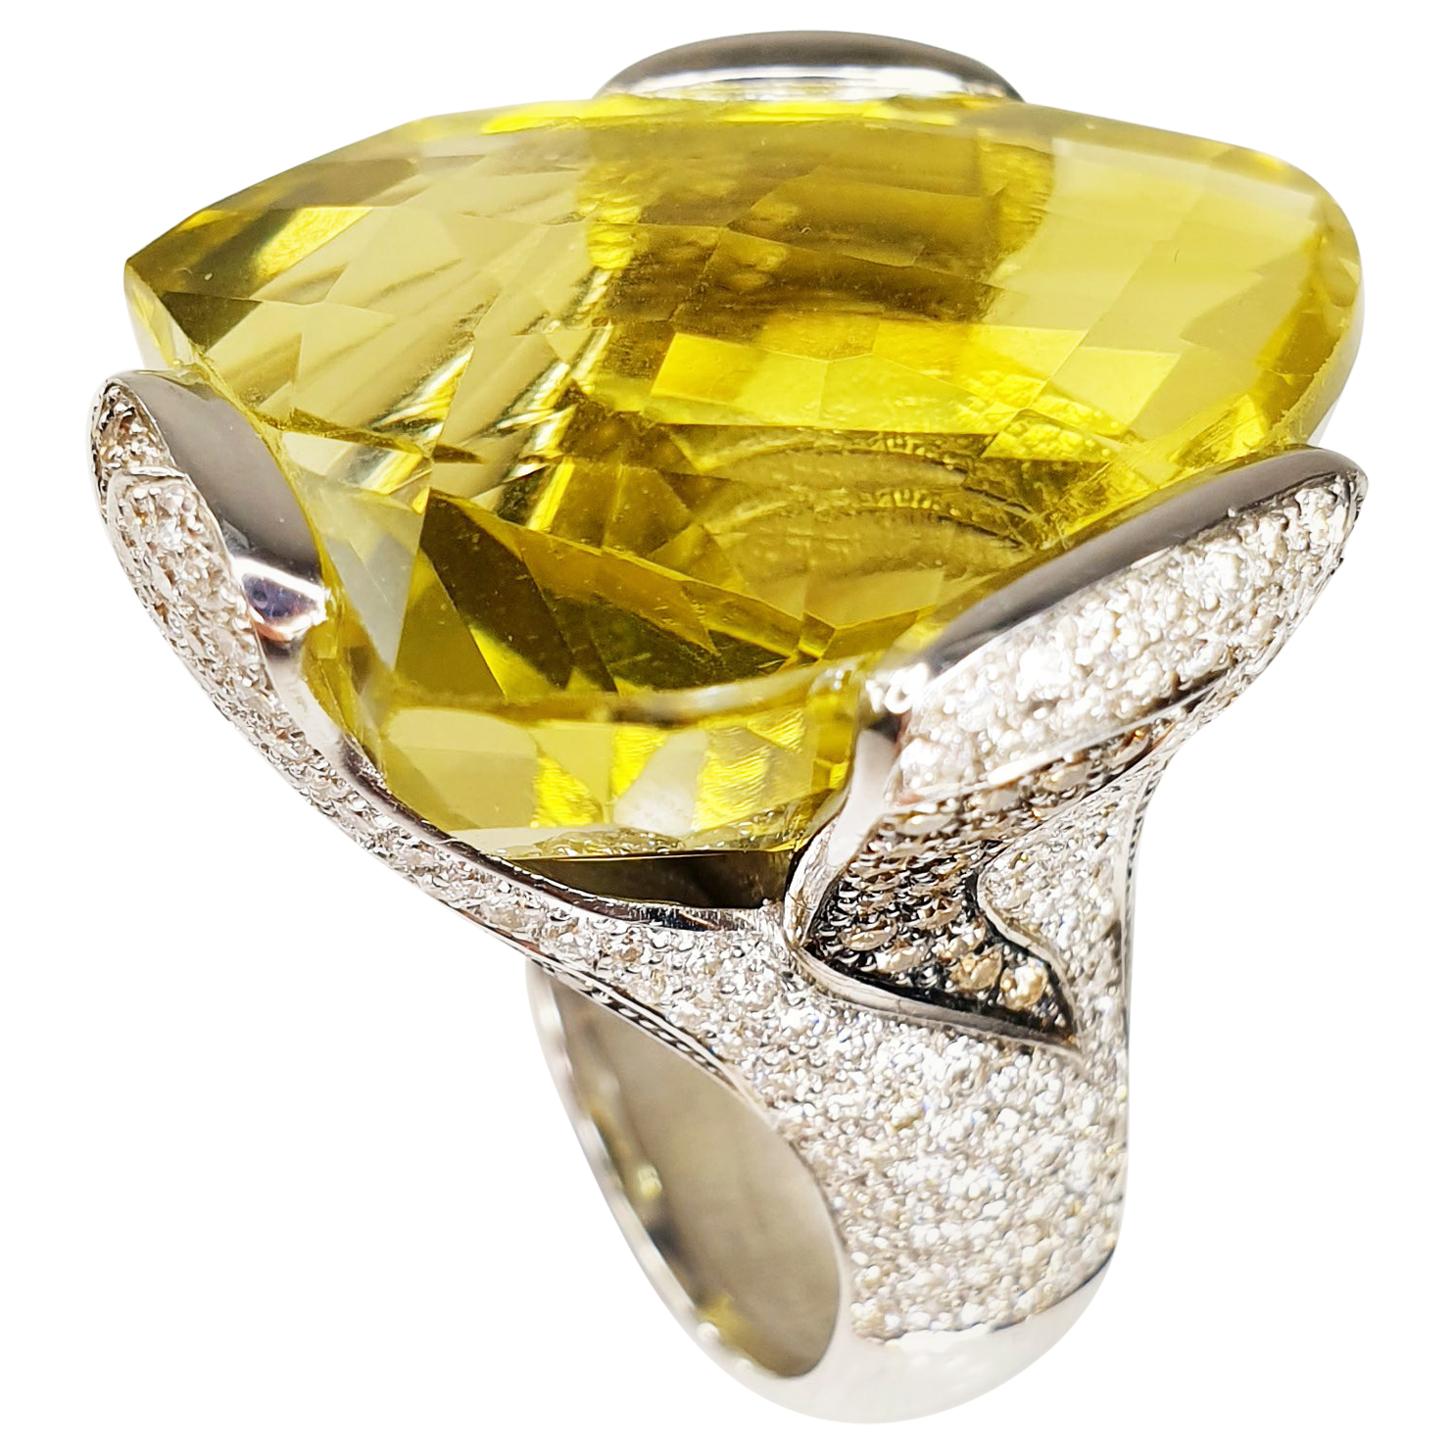 Multifaceted 51 Carat Citrine Quartz with Diamonds and 18 Karat White Gold Ring For Sale